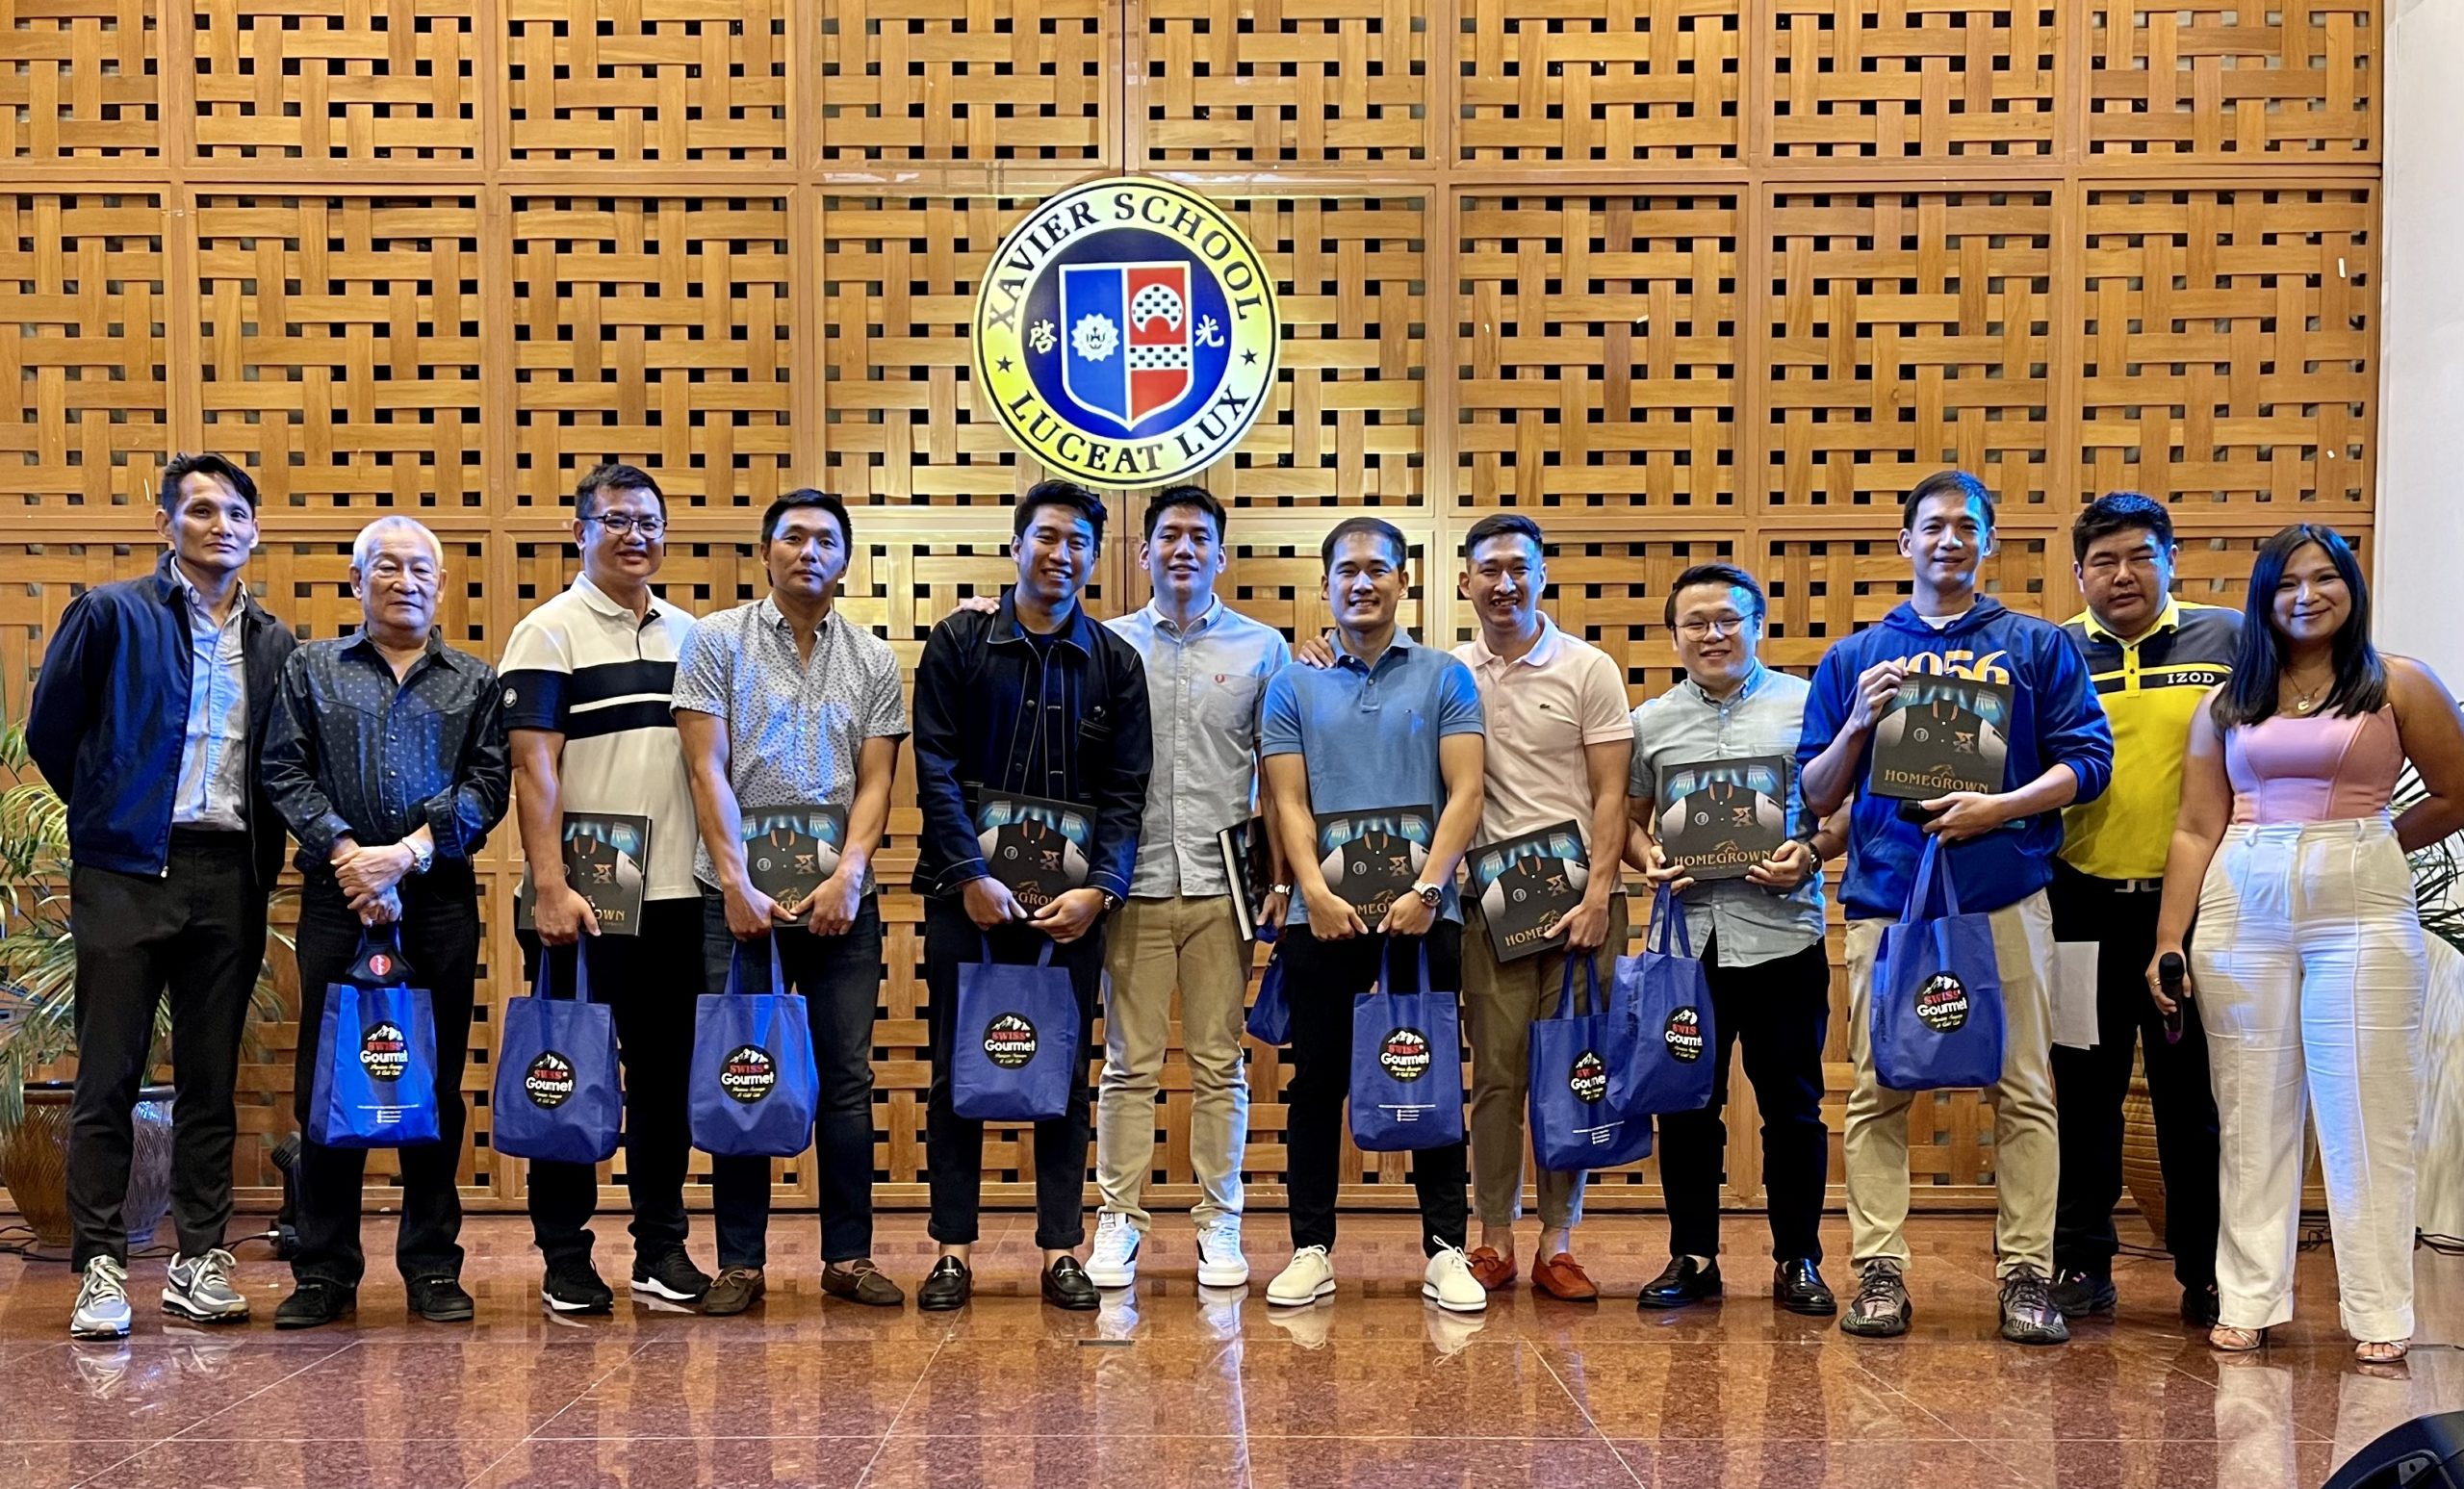 Xavier School alumni featured in the book launch of “Homegrown: A Celebration of Xavier Sports” last Monday, April 4 at the Angelo King Center inside Xavier School in San Juan.  Pictured are Jean Alabanza, Jerry Ngo, Eric Yao, Joseph Yeo, Jett Manuel, Jeron Teng, Kyles Lao, Jarrell Lim, Patrick Syquiatco, Chris Tiu, Xavier Alumni Association, Sports Vice President Oliver Gan, and co-host Eilien Shi.